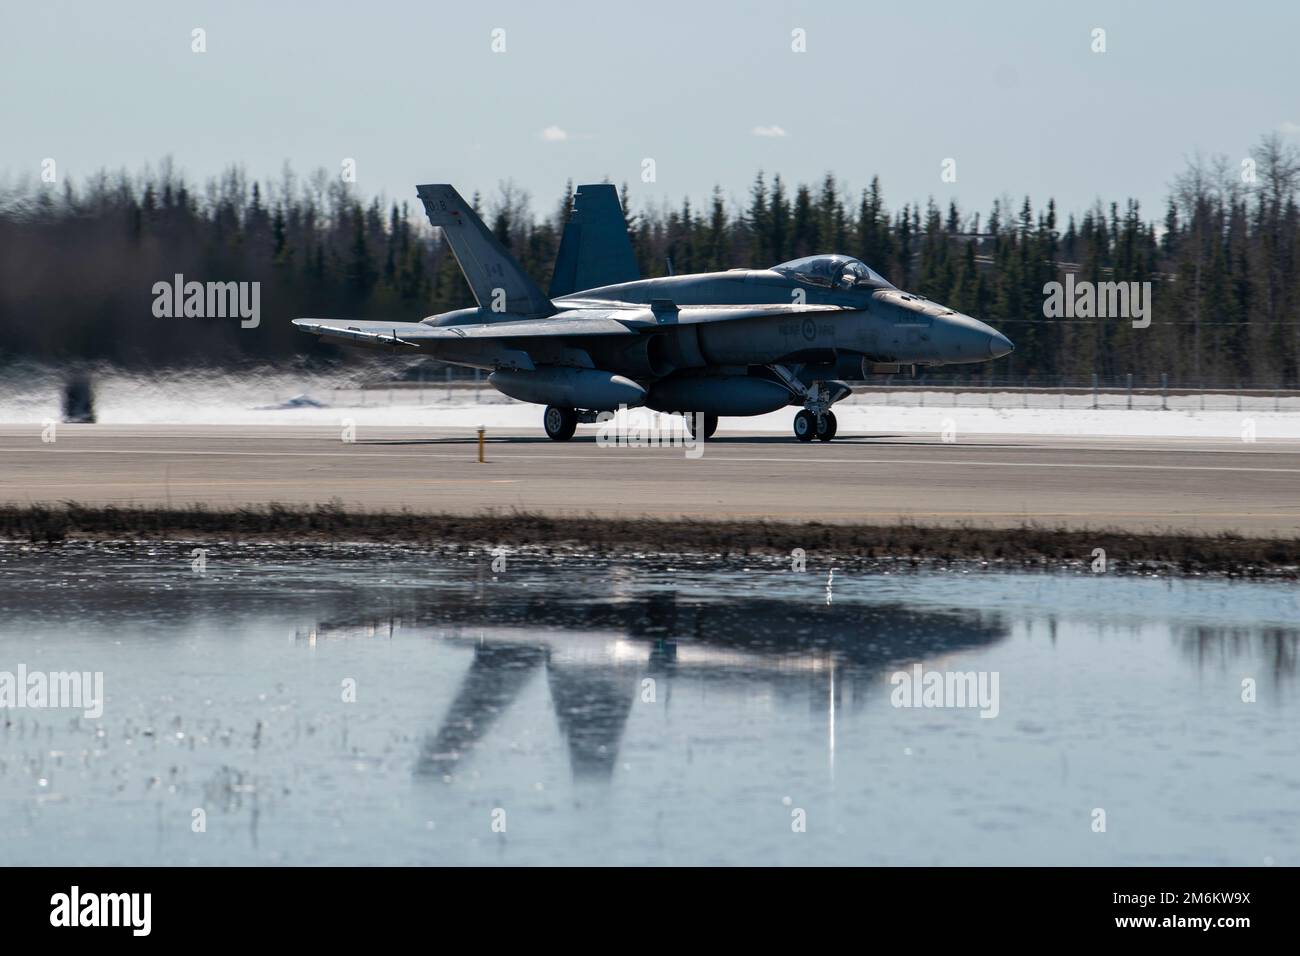 A CF-18 Hornet assigned to the 401 Tactical Fighter Squadron of the Royal Canadian Air Force takes off during exercise RED-FLAG-Alaska 22-1, at Eielson Air Force Base, Alaska, April 29, 2022. This exercise provides unique opportunities to integrate various forces into joint and multilateral training from simulated forward operating bases. Stock Photo